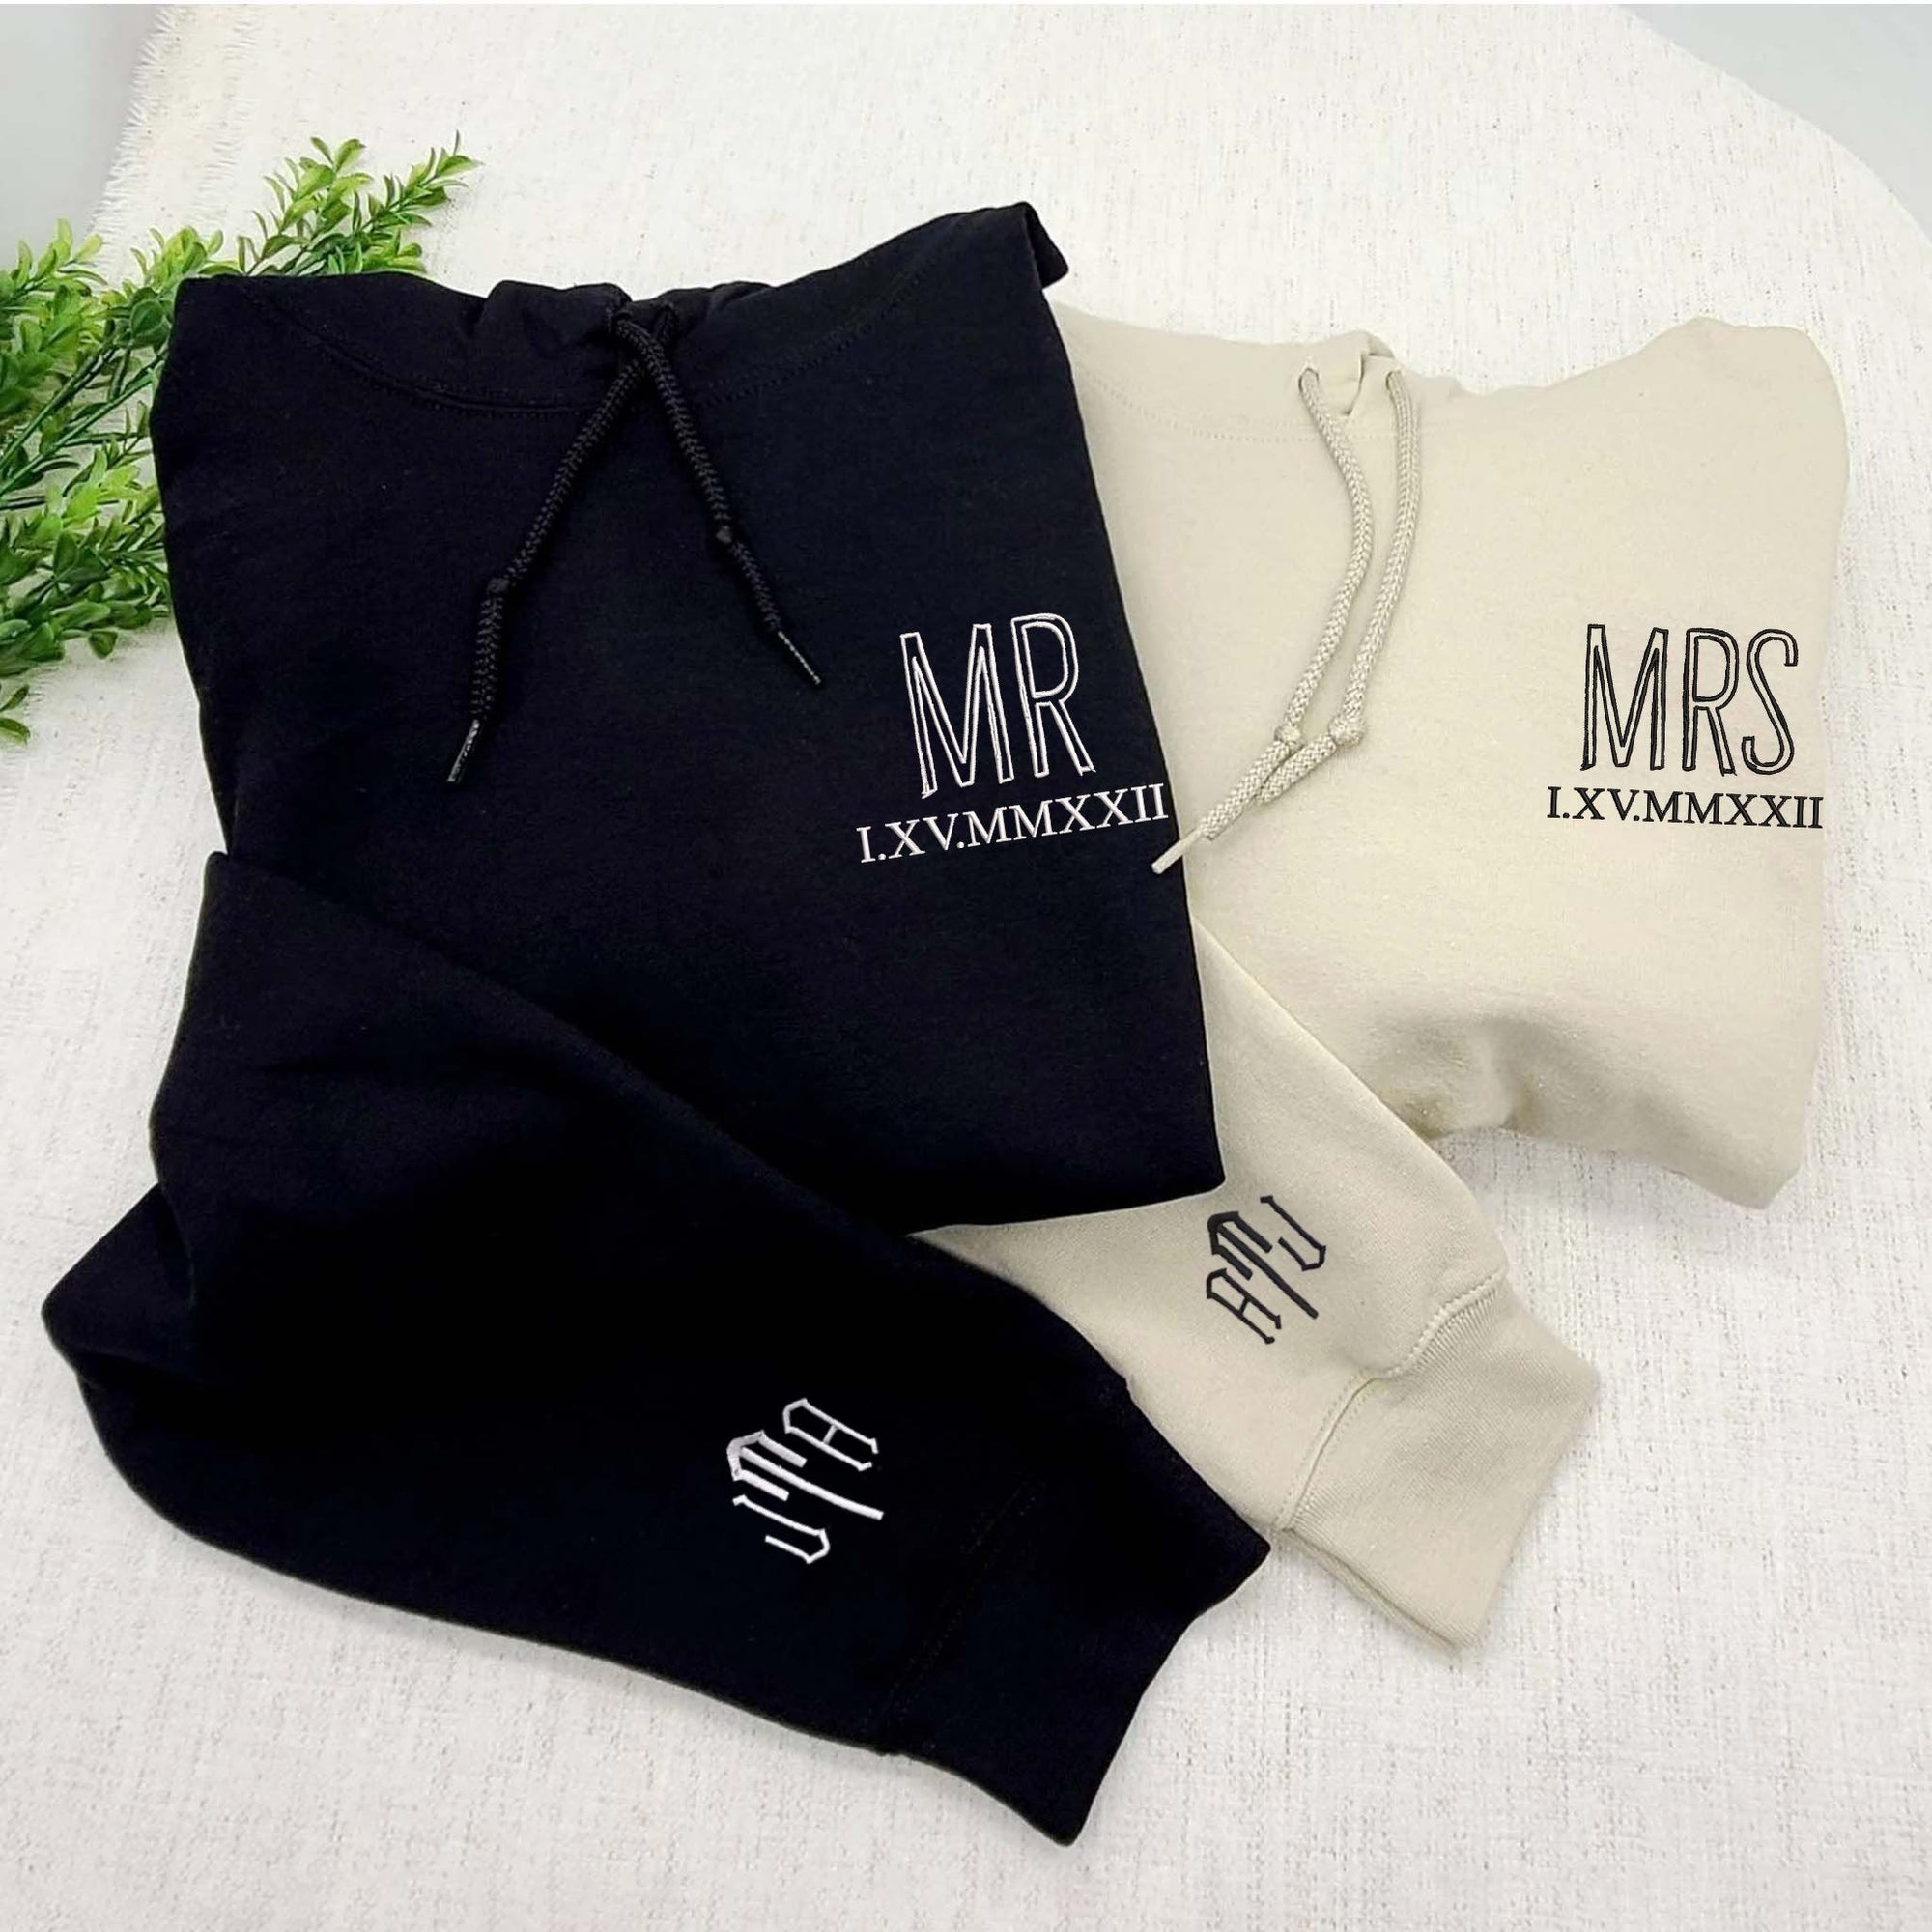 Personalized Mr And Mrs Embroidered Hoodie With Aniniversary Date, Best Gift For Couple